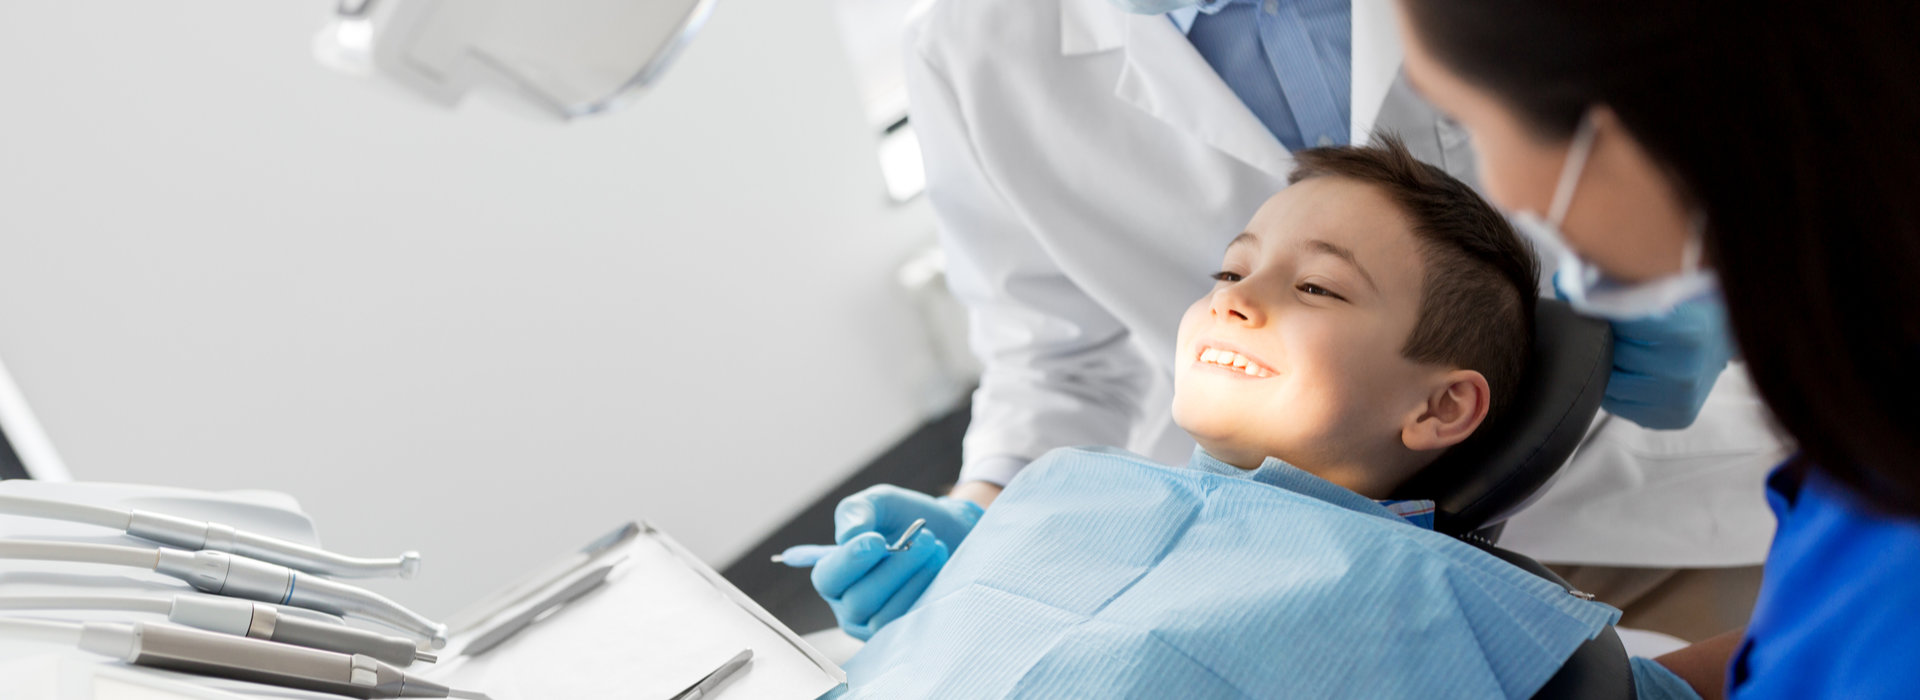 A child is smiling after Oral Cancer Screening.